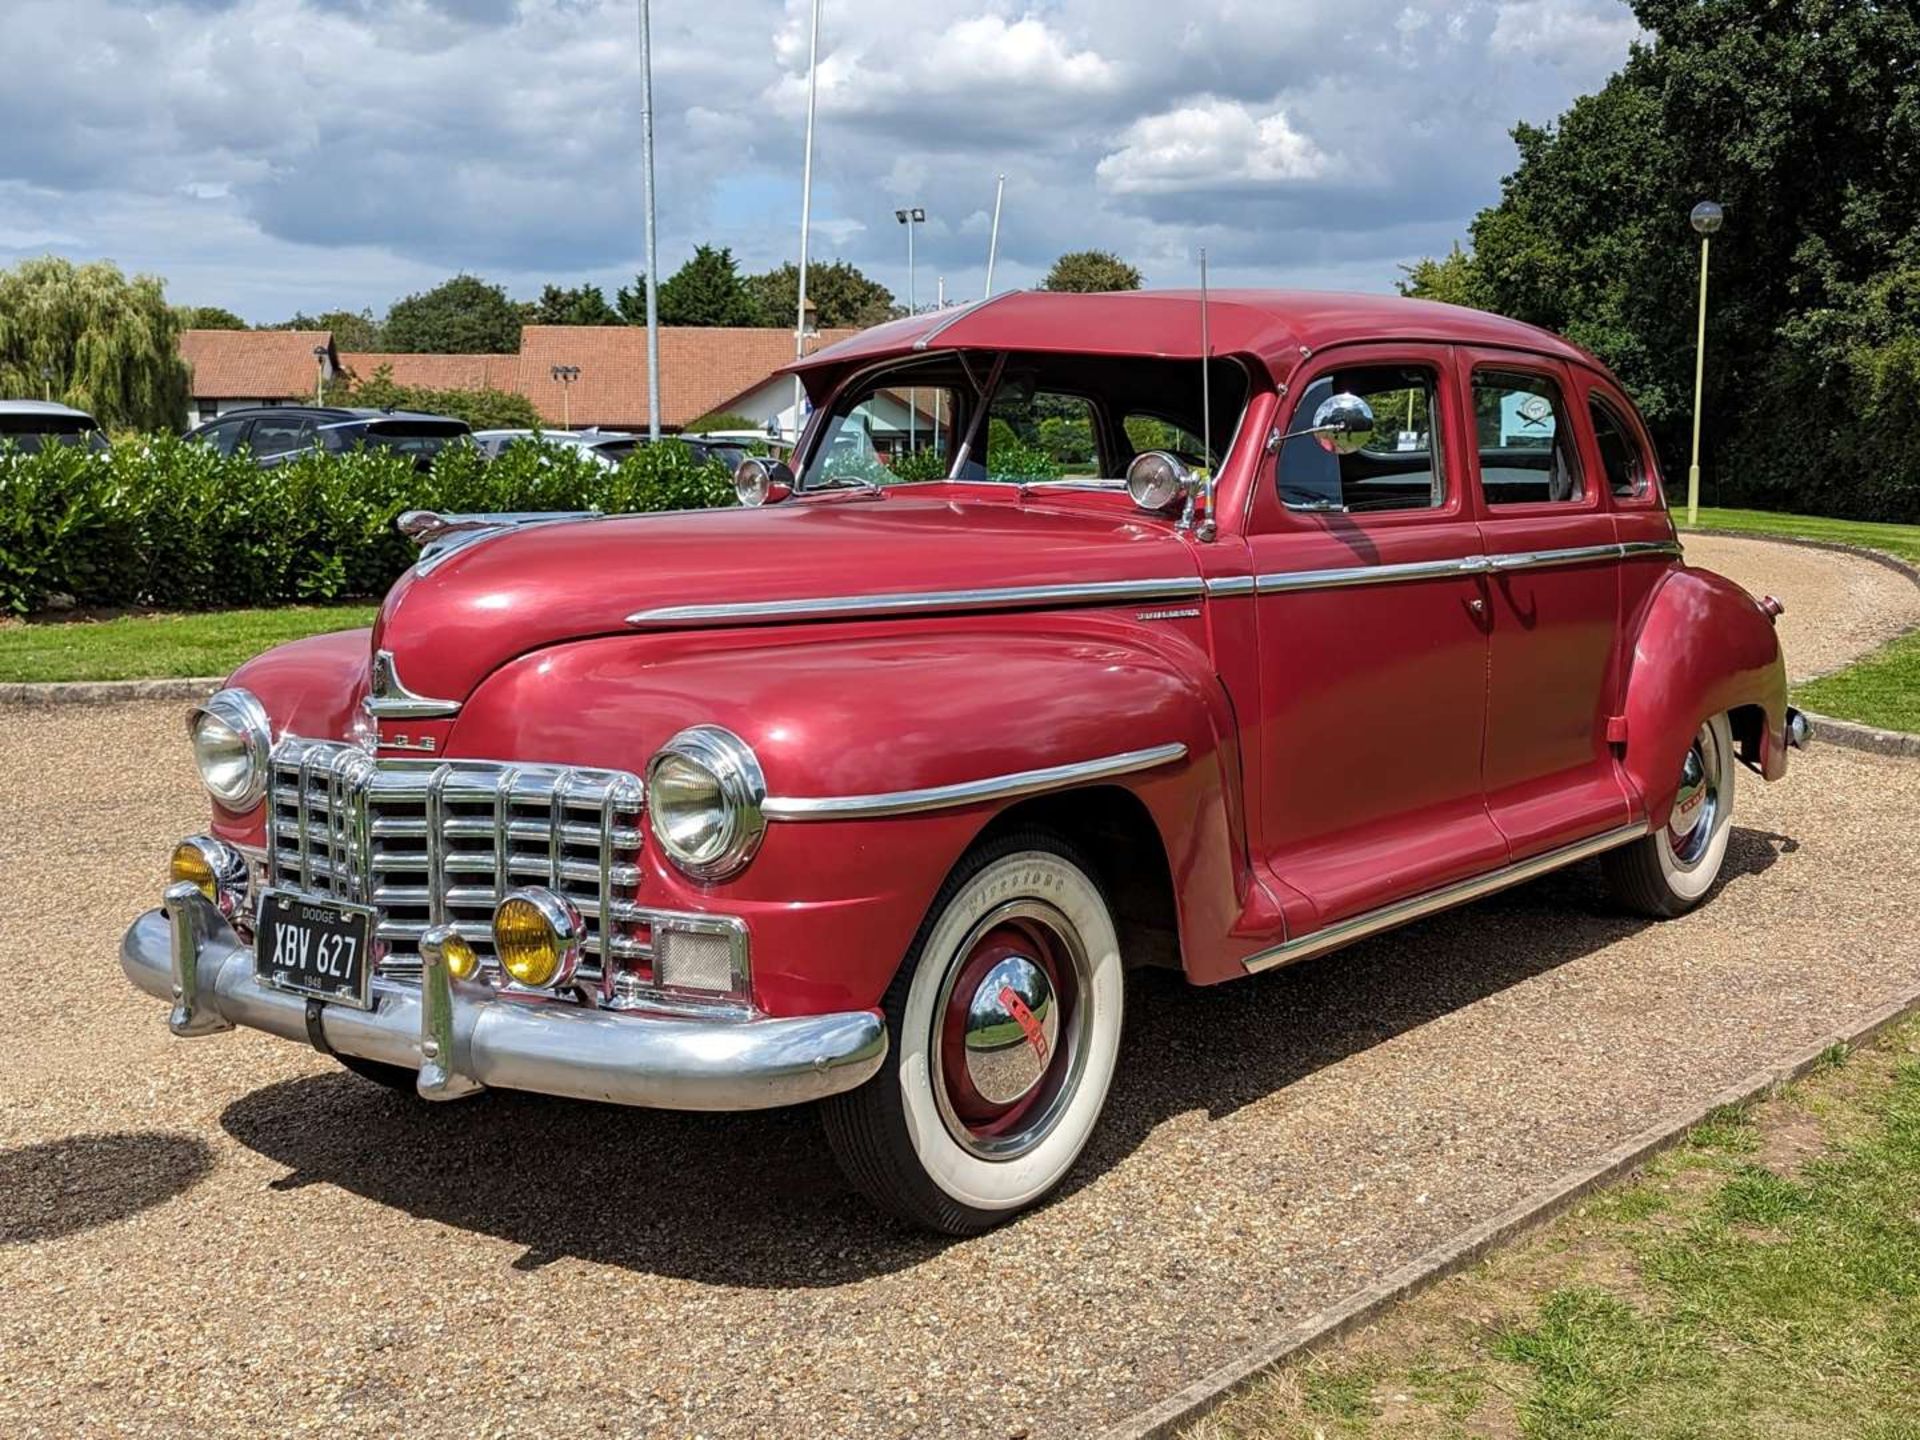 1947 DODGE SPECIAL DELUXE LHD - Image 3 of 30